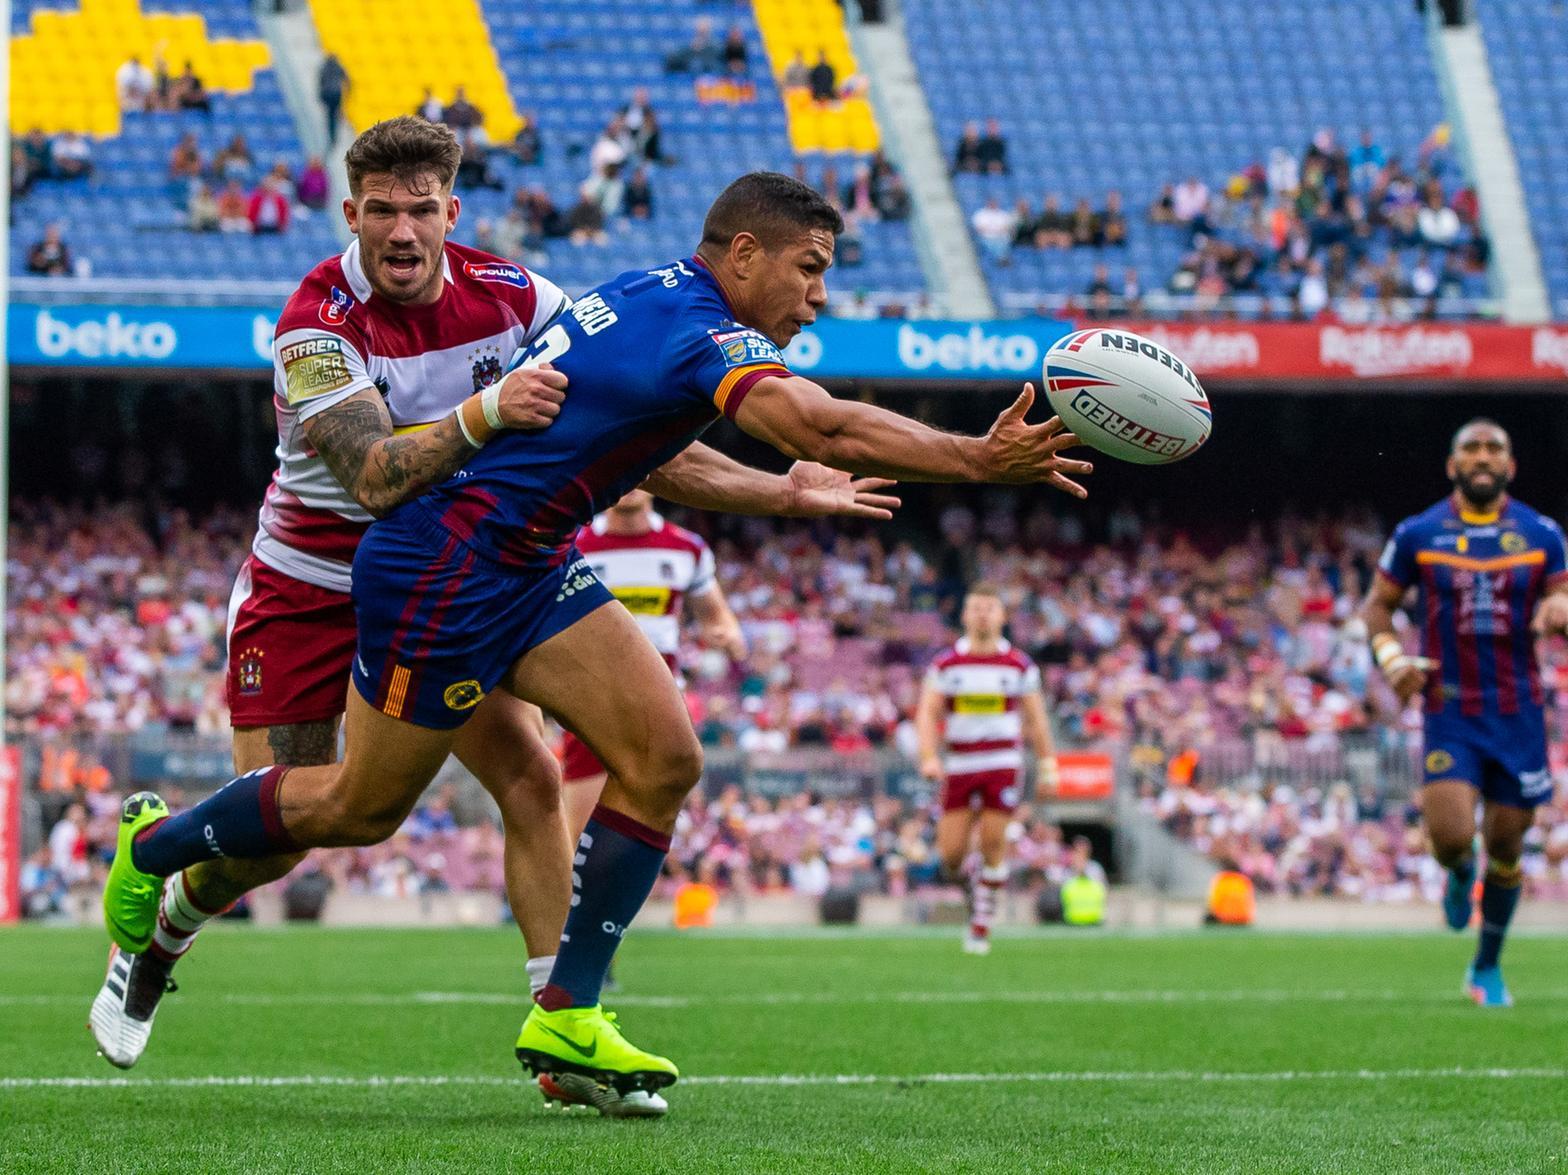 Wigan were a part of history last year when Catalans invited them to play at Barcelonas Camp Nou in front of a record Super League crowd of 31,555. The Dragons won the match 33-16. Picture: SWPix